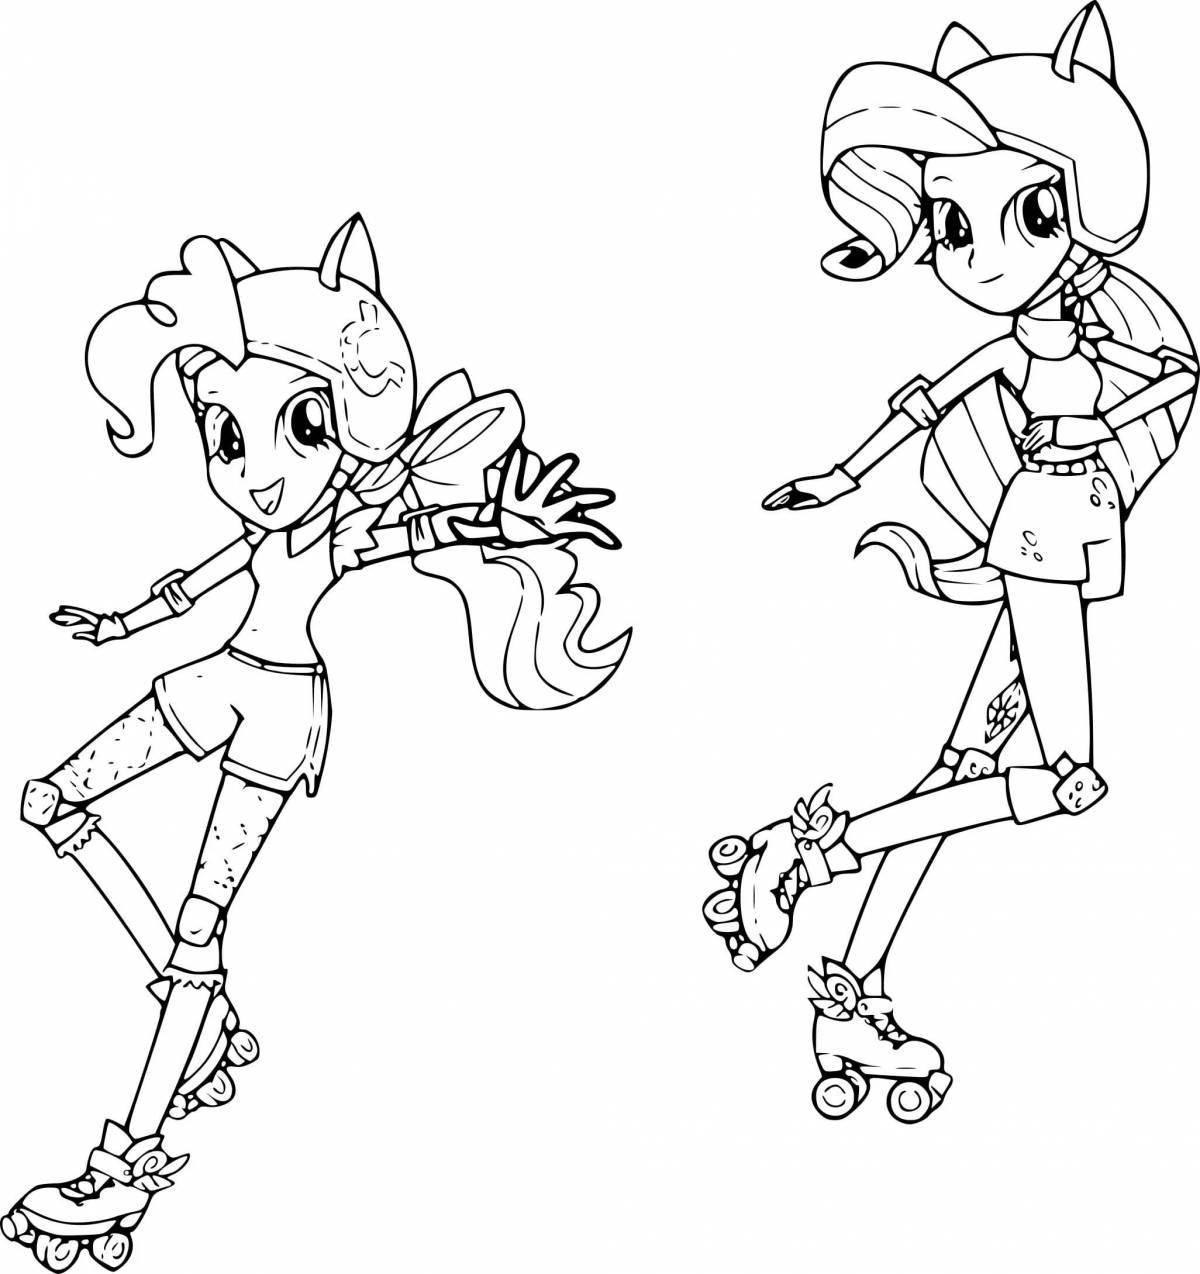 Colorific pony doll coloring page